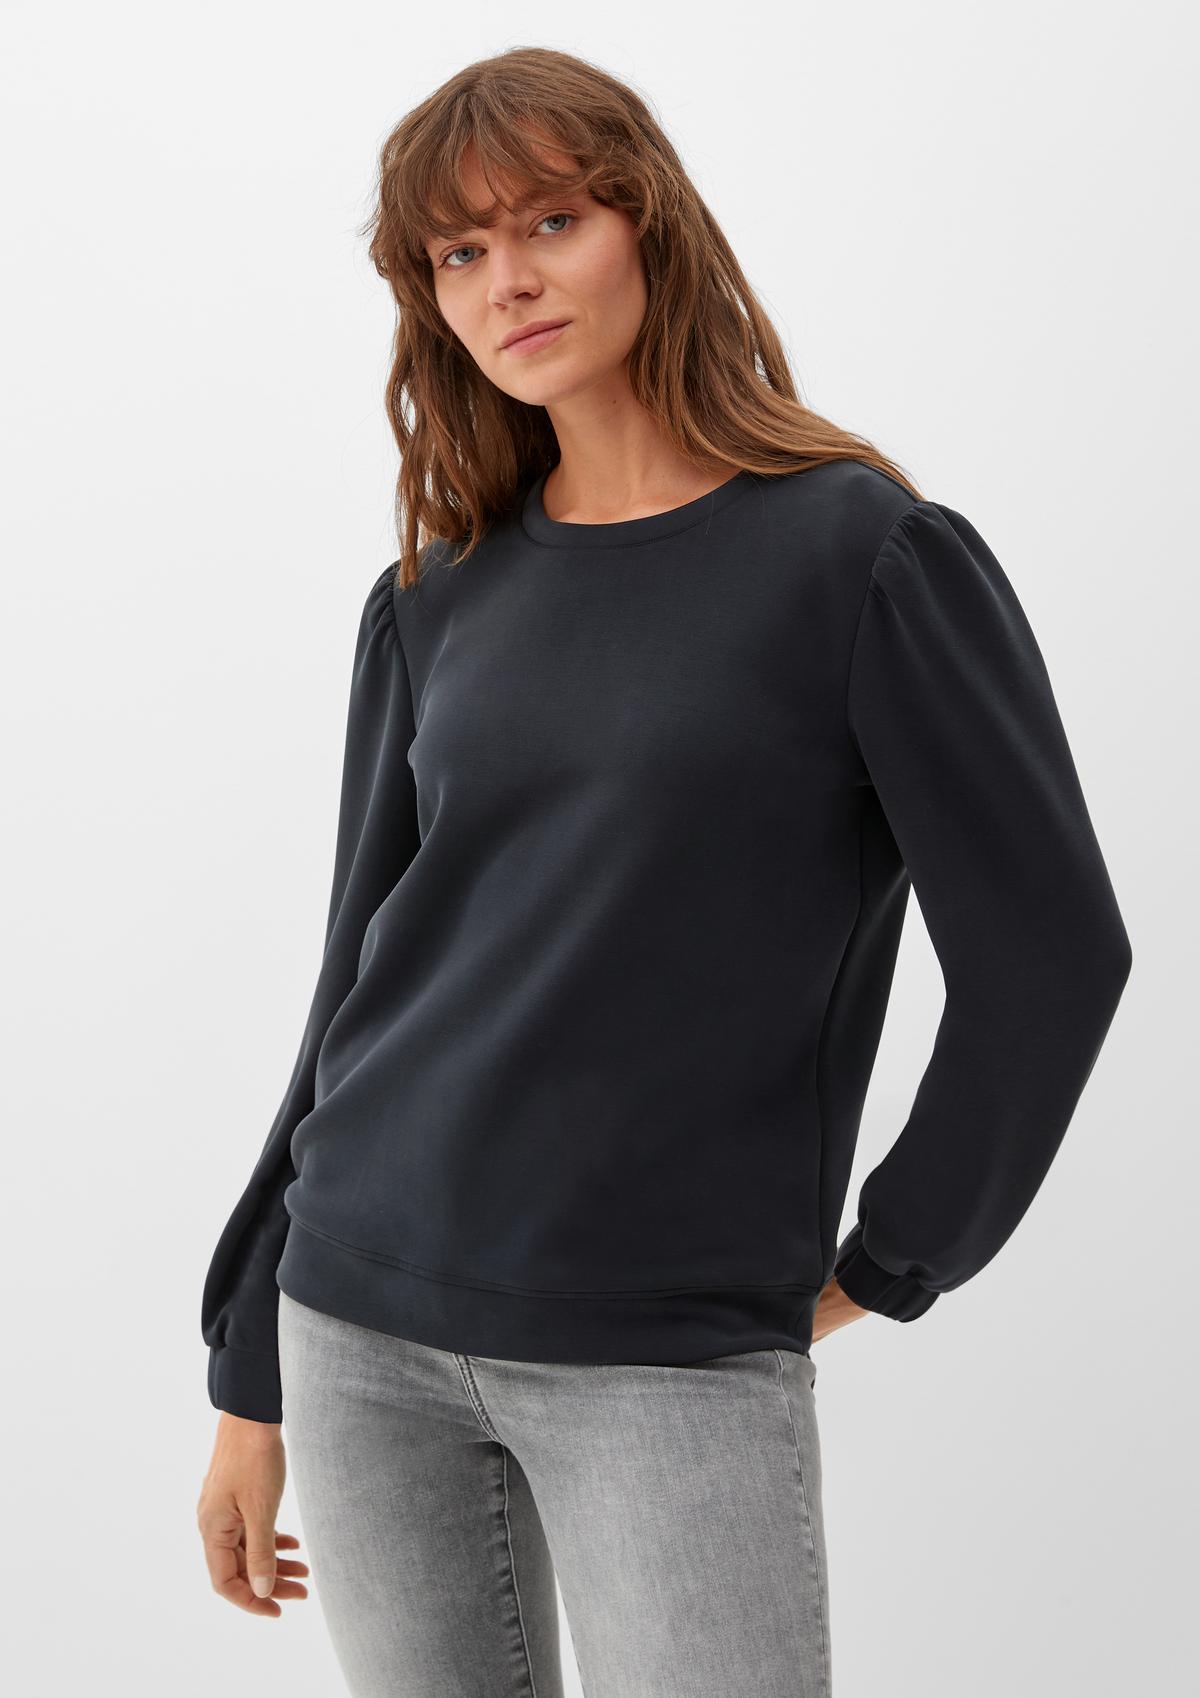 Long sleeve top made of - cotton navy stretch